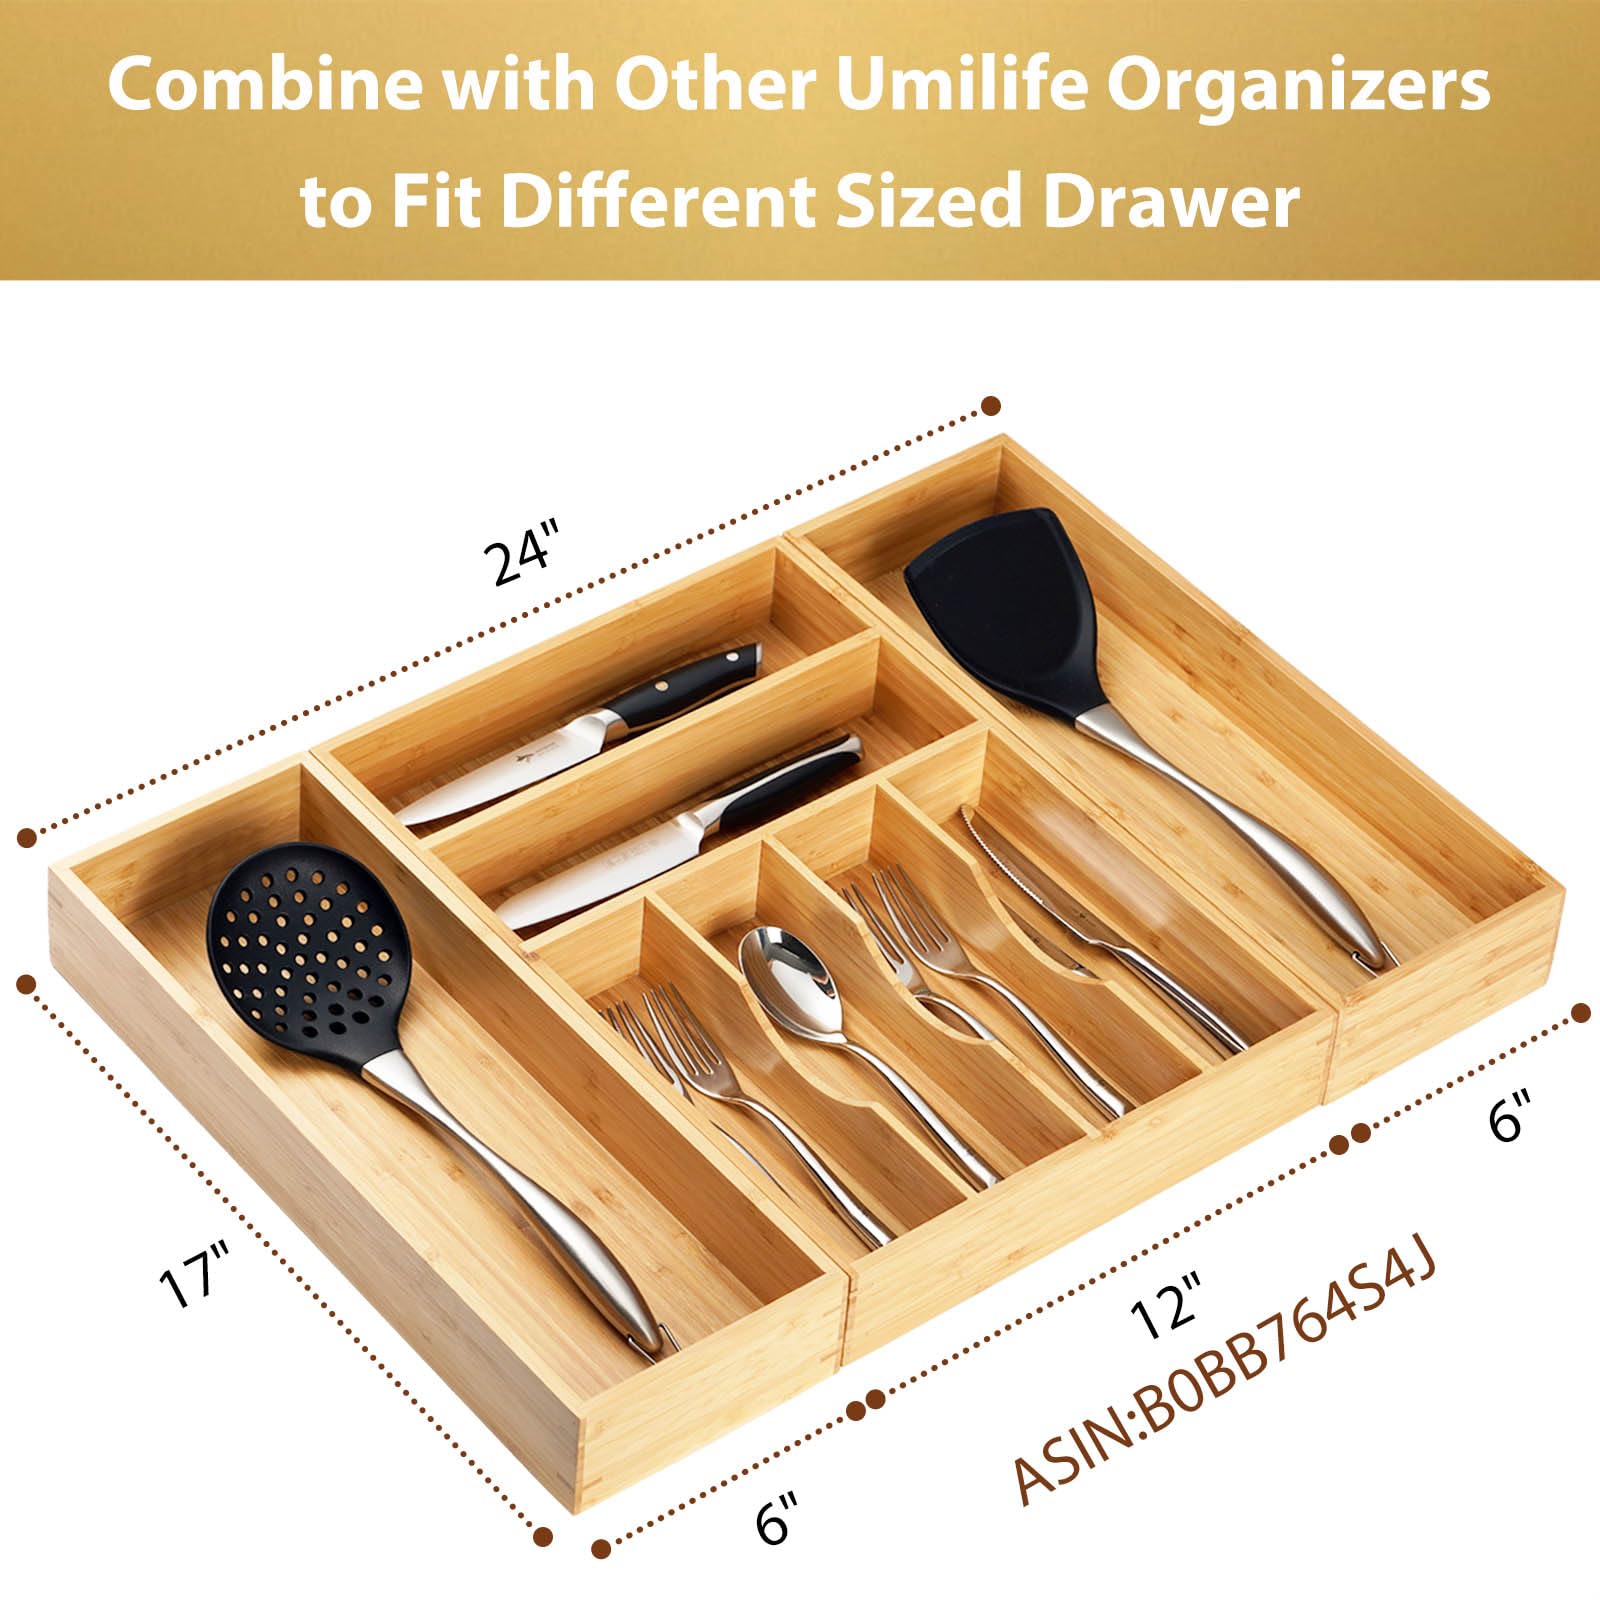 Umilife Bamboo Kitchen Utensils Organizer, Extra Long High Silverware Drawer Holder, Flatware Cutlery Storage Box, Multi-Use Drawer Divider in Office, Bathroom, Pantry - 17"x6"x2.5" (Set of 2)